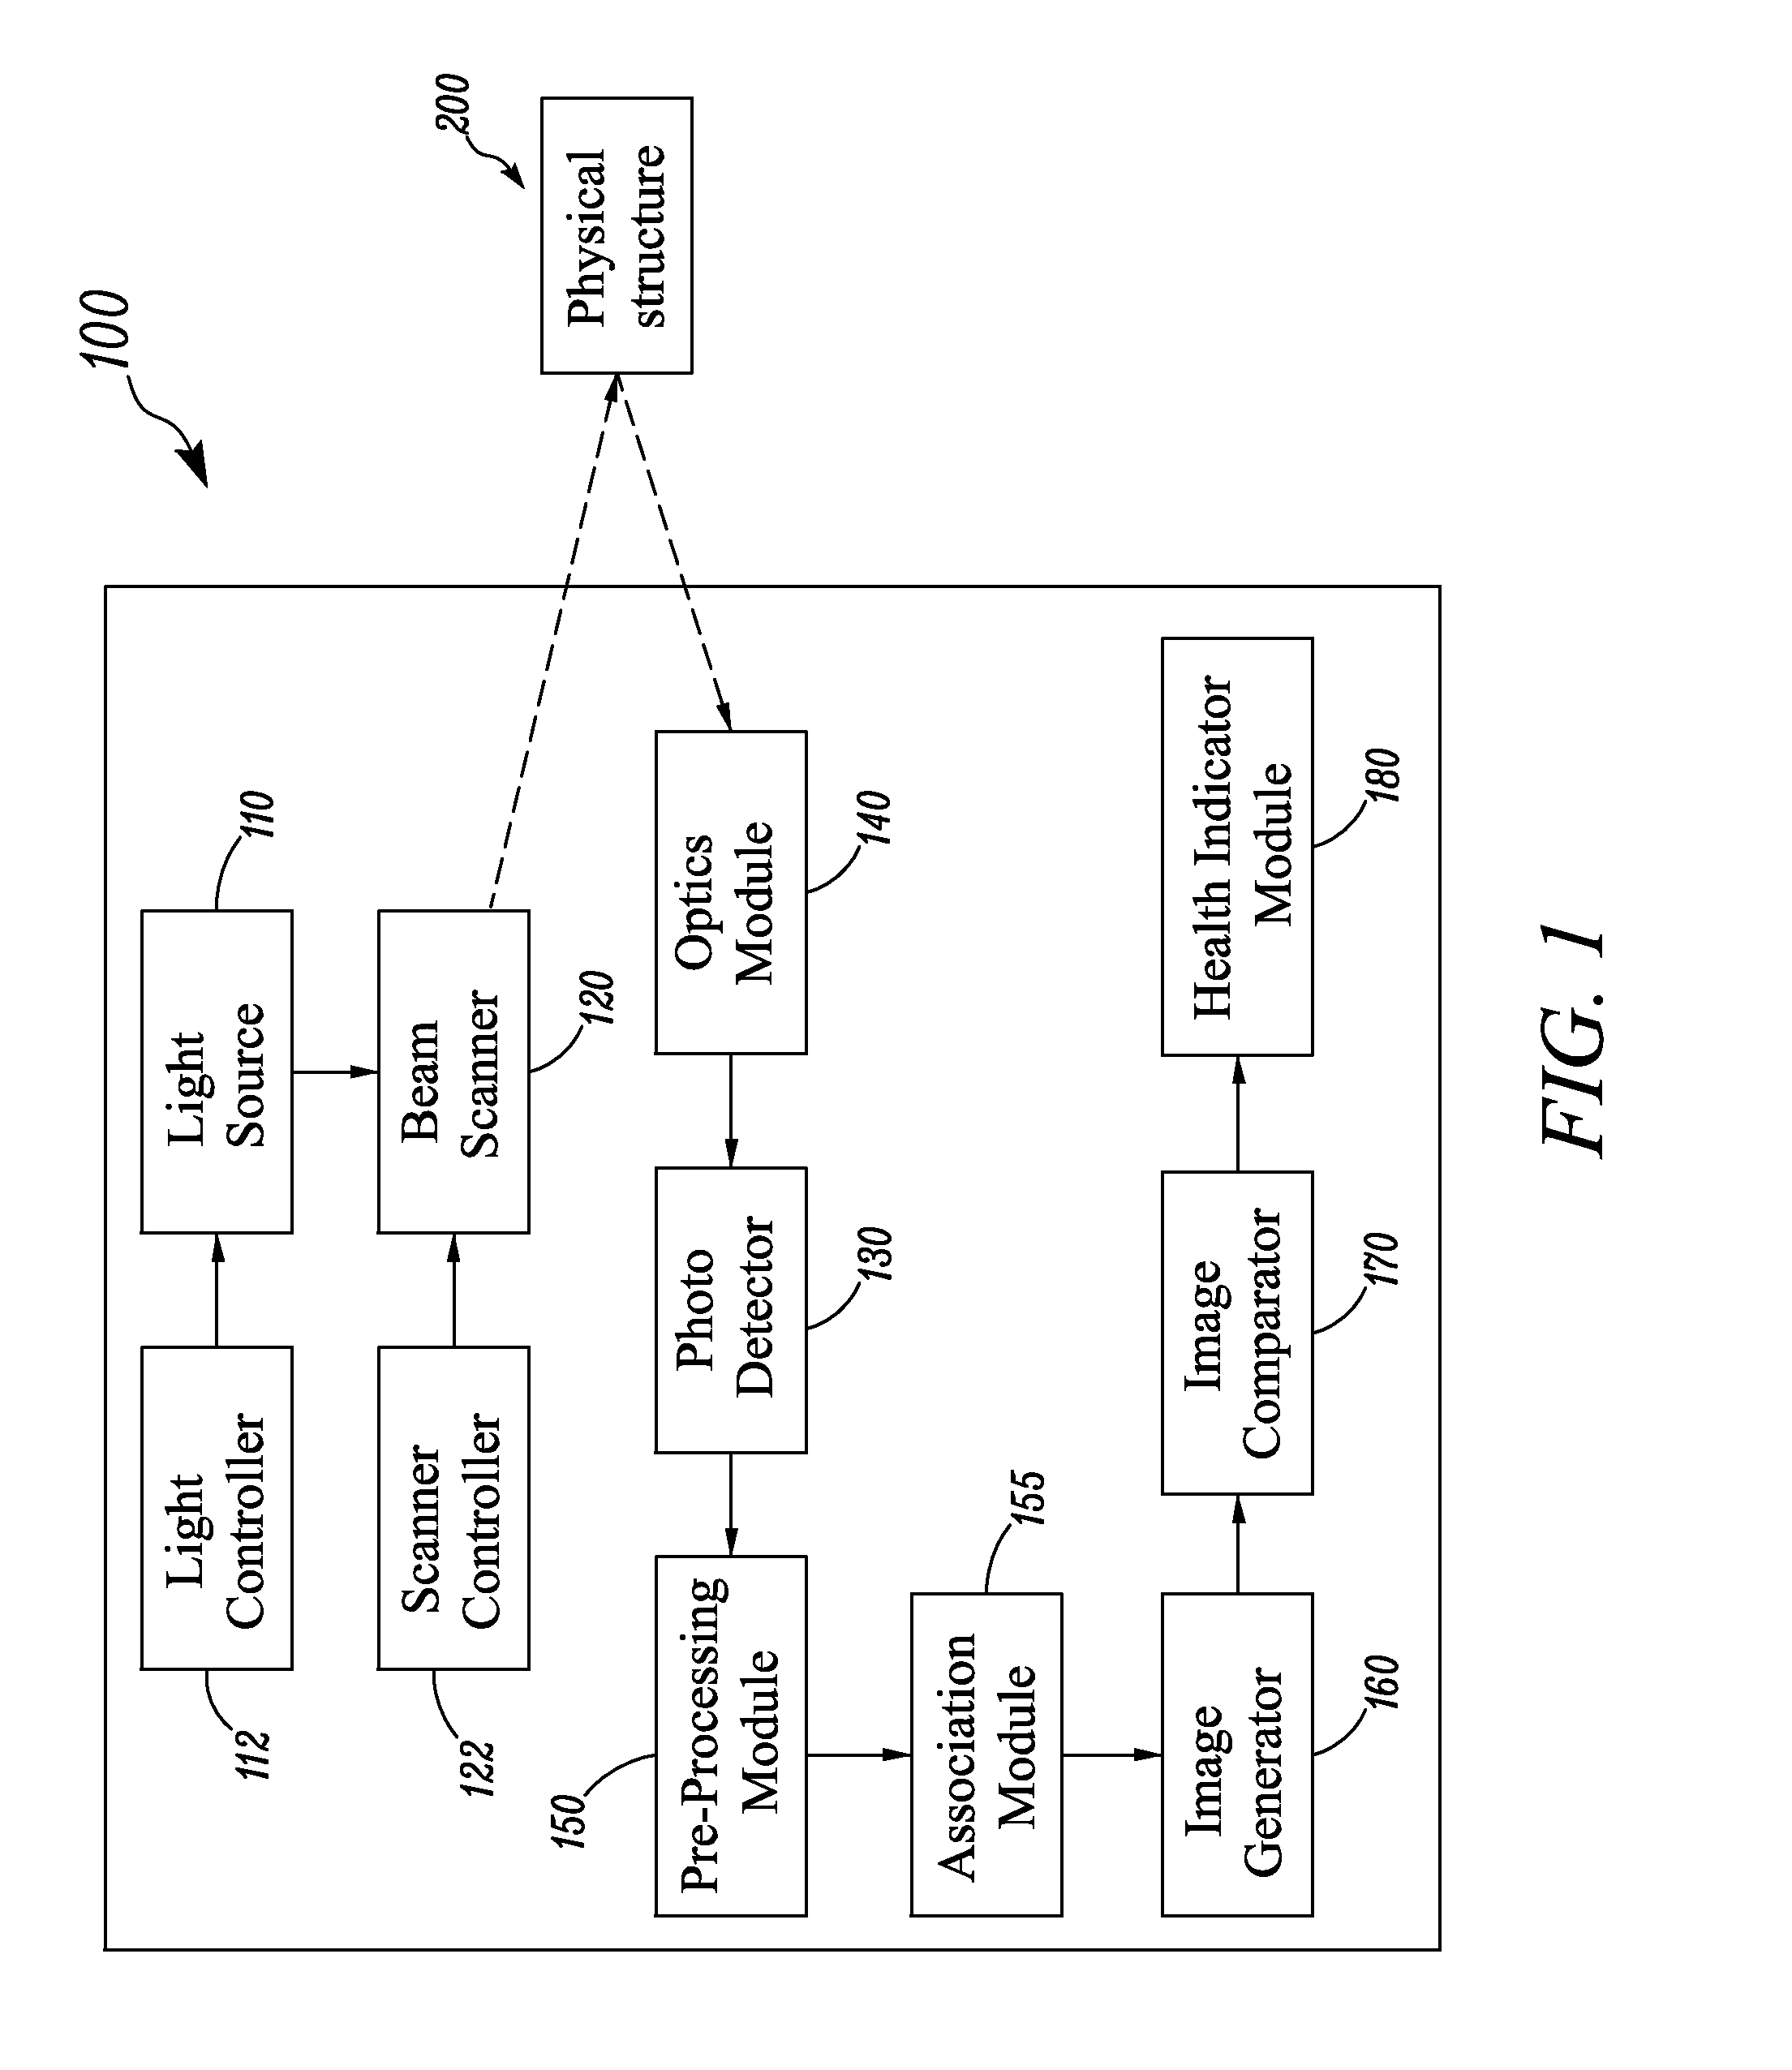 System and method for monitoring and controlling physical structures